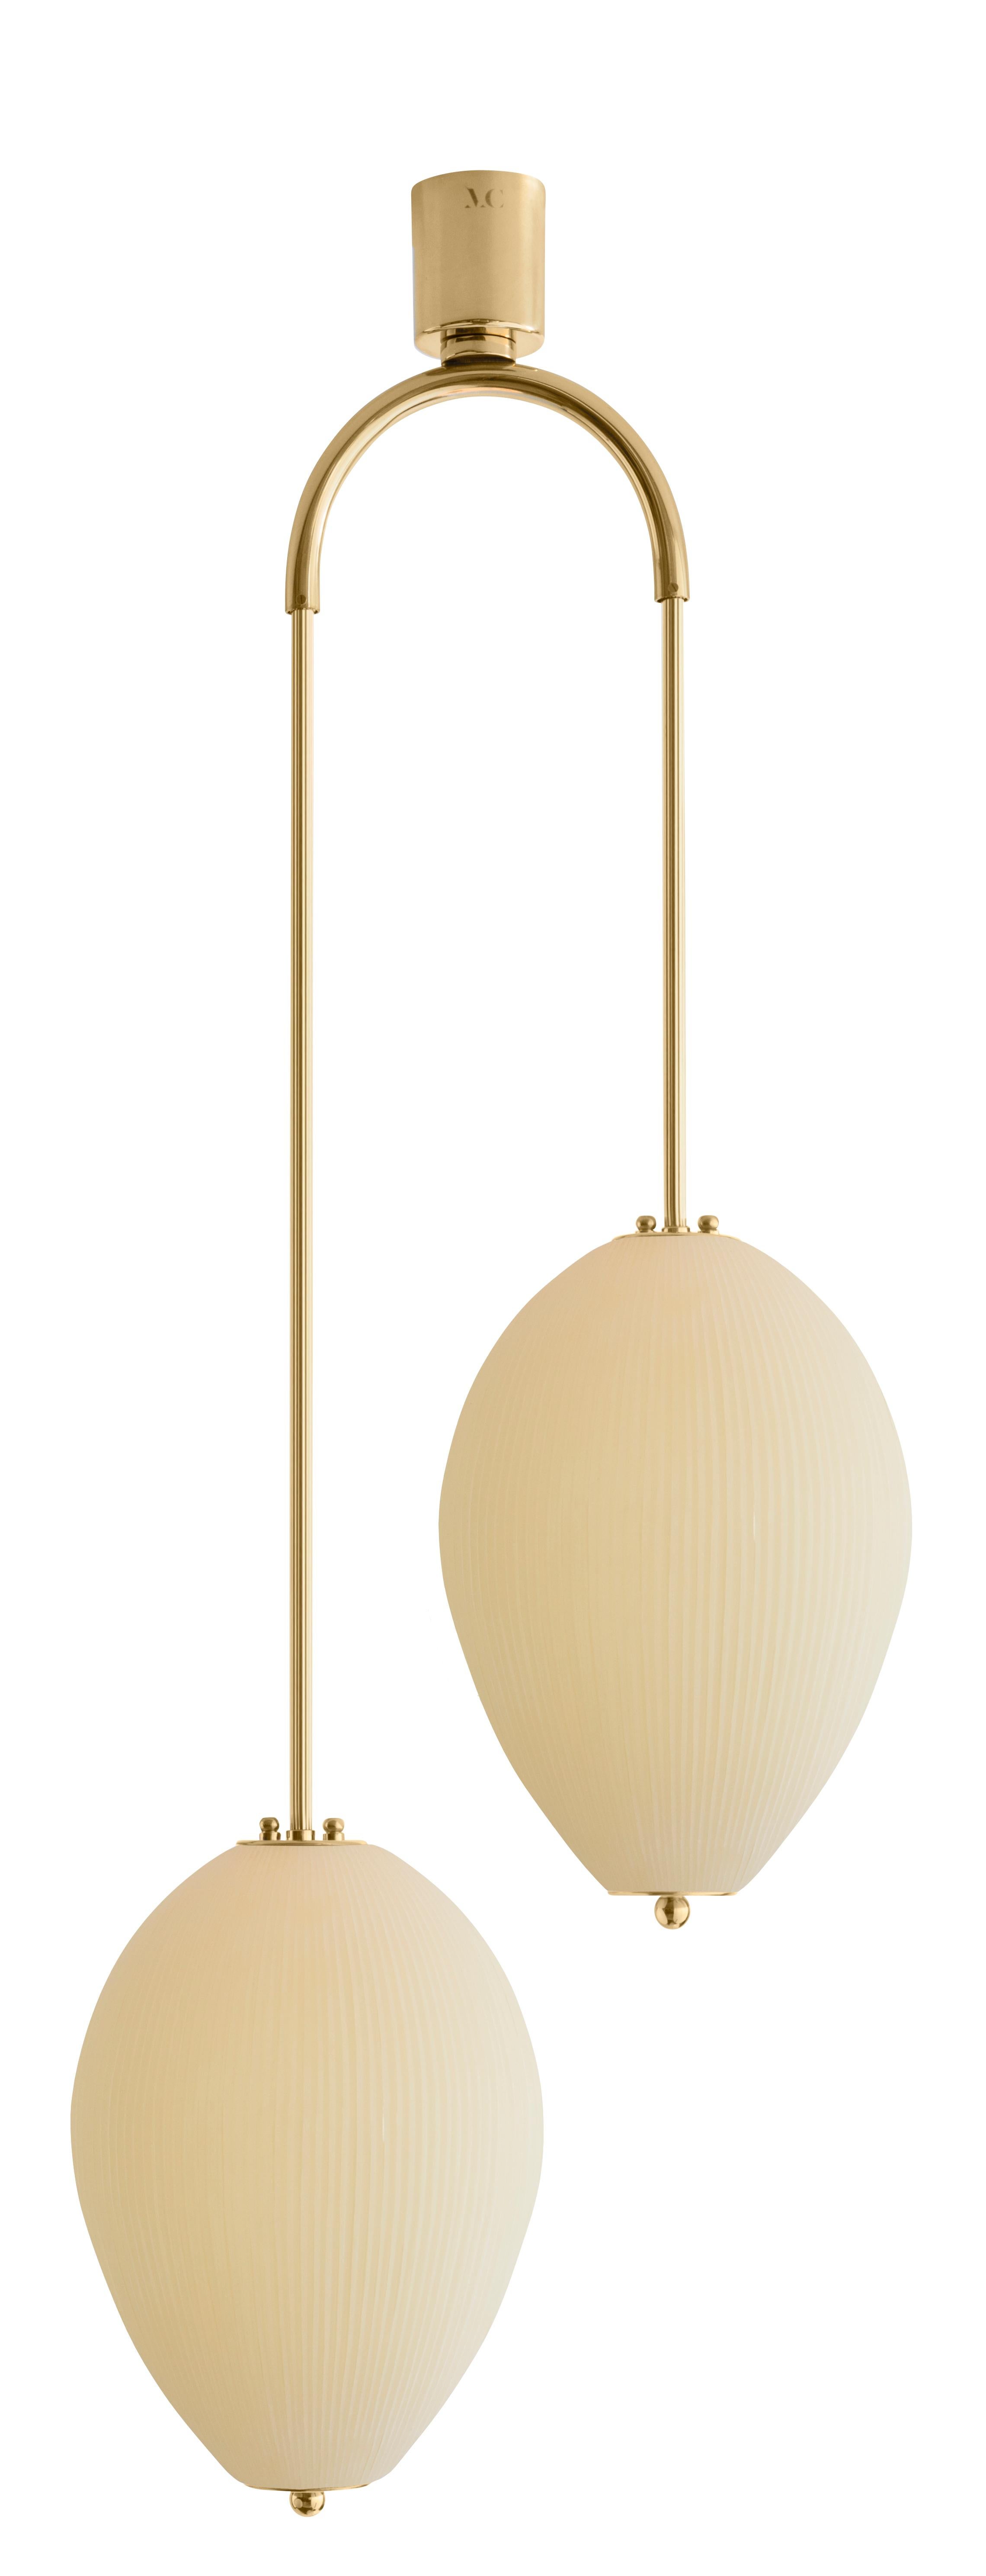 Double chandelier China 10 by Magic Circus Editions
Dimensions: H 121.5 x W 44.3 x D 25.2 cm
Materials: Brass, mouth blown glass sculpted with a diamond saw
Colour: mustard yellow

Available finishes: Brass, nickel
Available colours: enamel soft